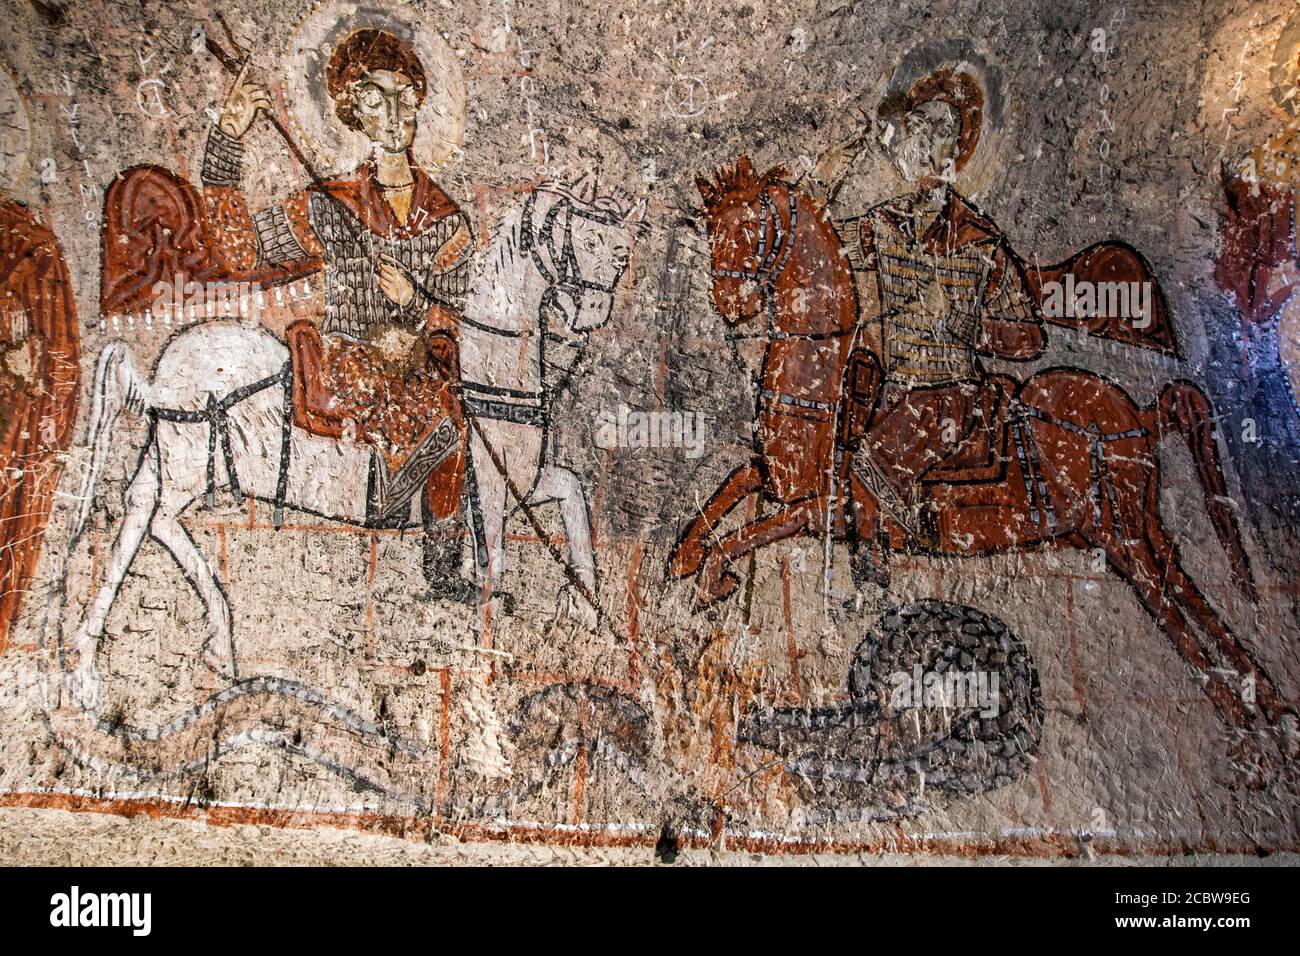 A fresco depicting St George and St Theodore mounted on horses in Yilanli (Snake) Church at the Open Air Museum near Goreme in Turkey. Stock Photo